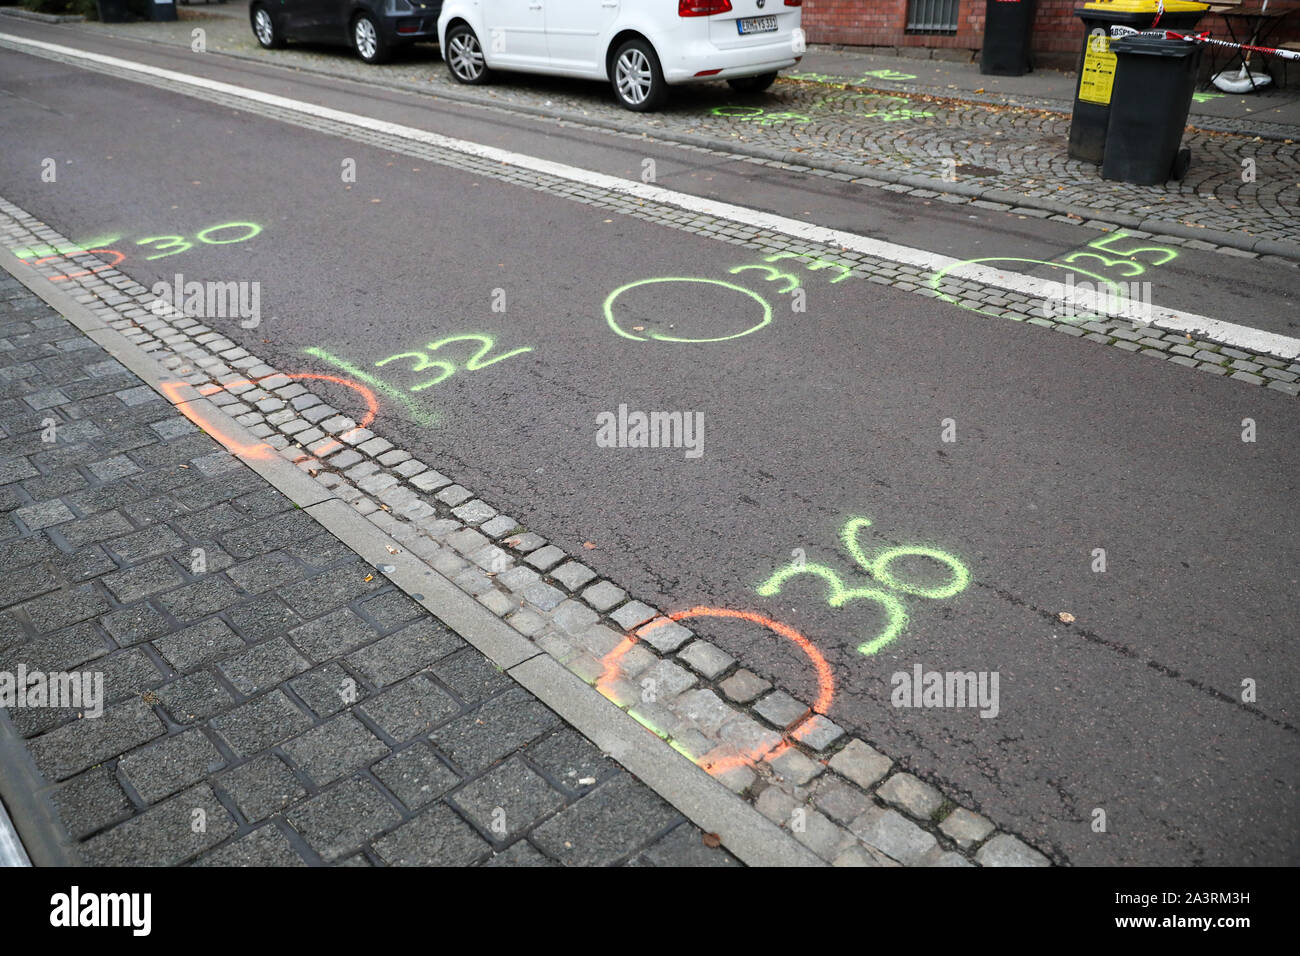 Halle, Germany. 10th Oct, 2019. Police markings can be seen on the street in front of a kebab shop. During attacks in the middle of Halle an der Saale in Saxony-Anhalt yesterday two people were shot dead in front of a synagogue and in a kebab snack bar. Credit: dpa picture alliance/Alamy Live News Stock Photo